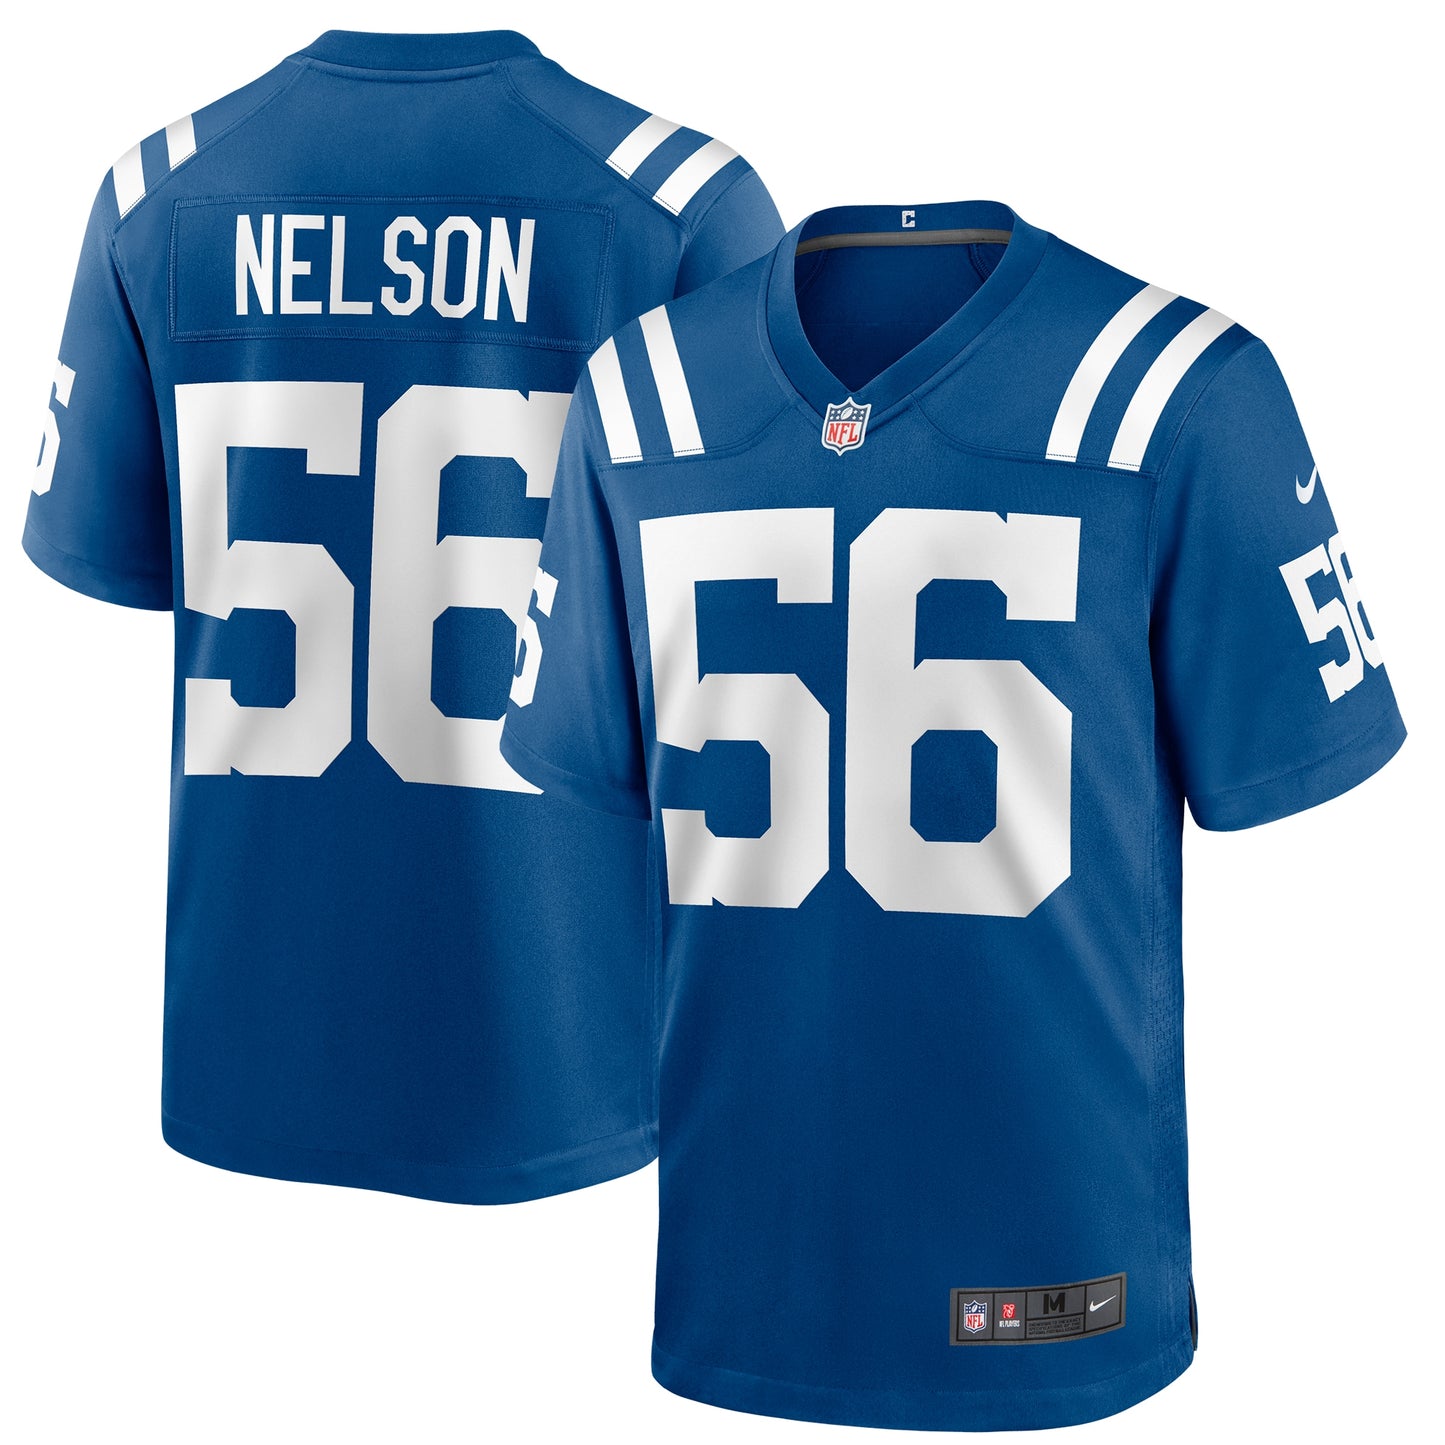 Quenton Nelson Indianapolis Colts Nike Game Player Jersey - Royal